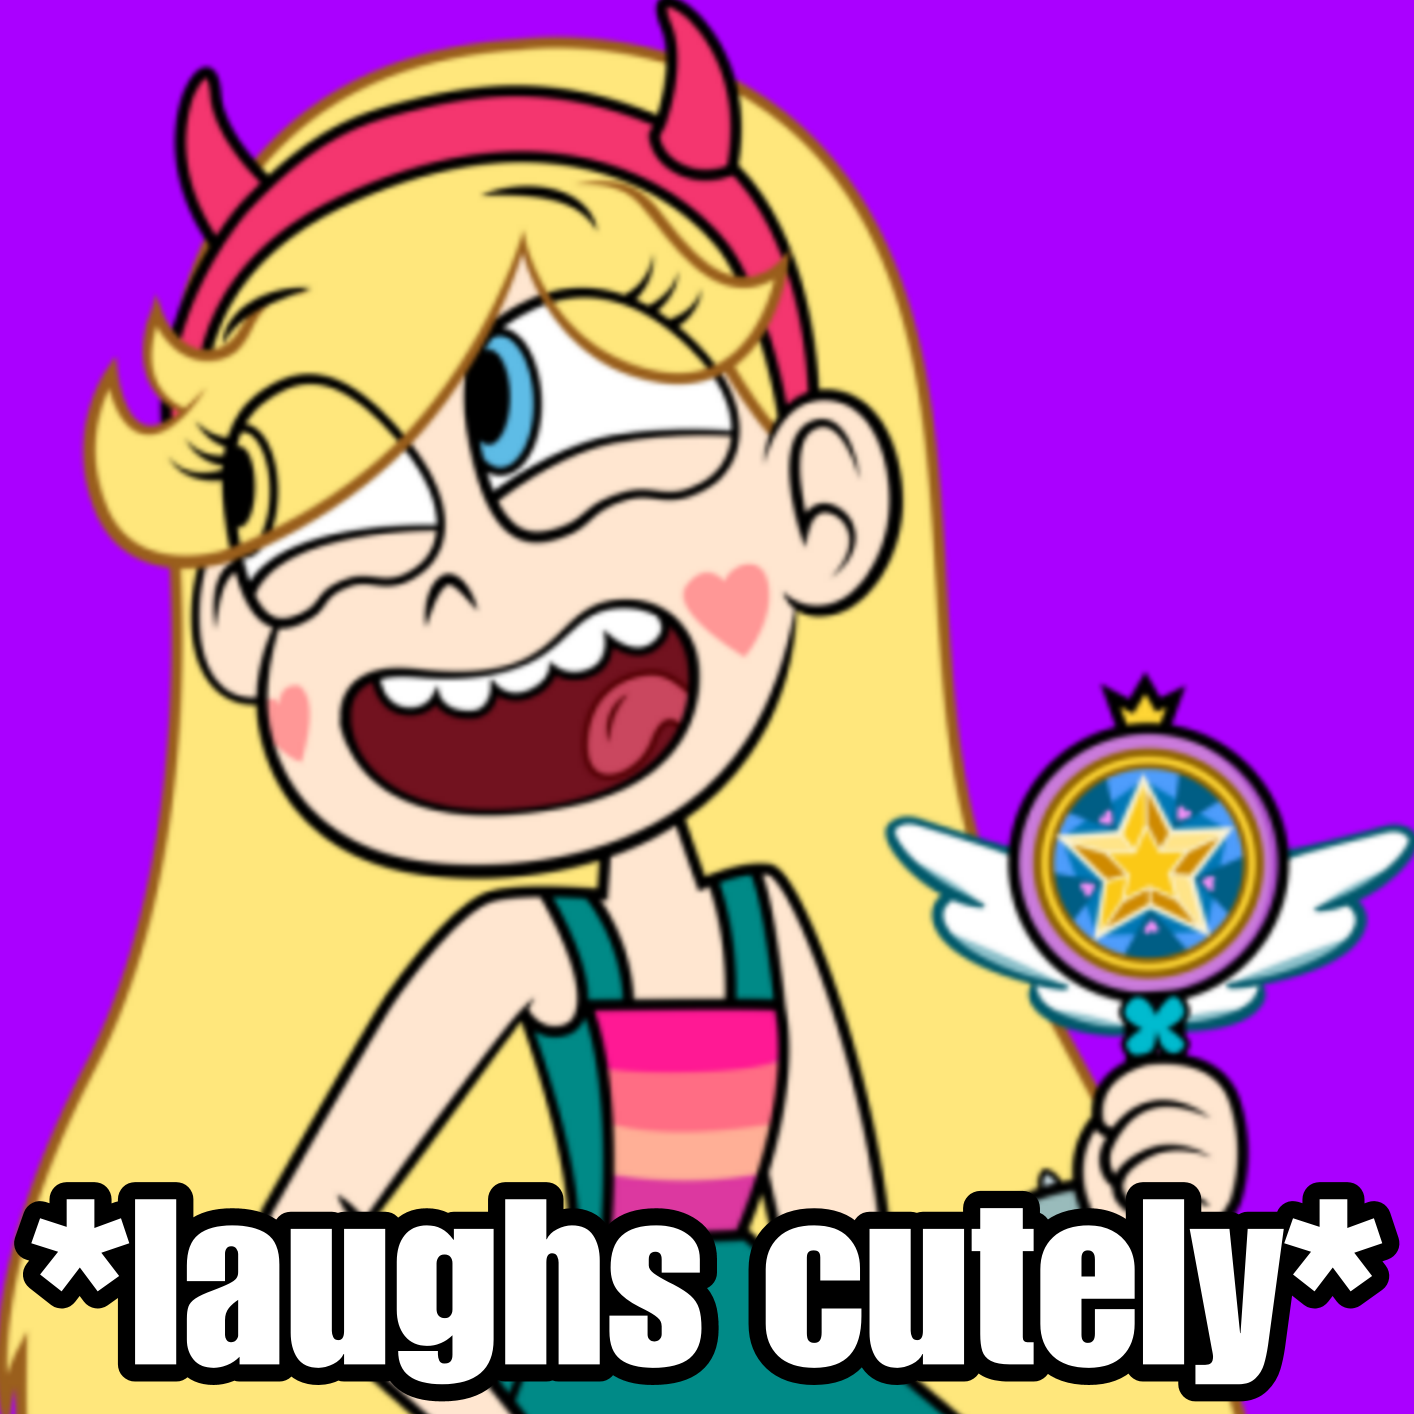 High Quality Star butterfly laughs cutely Blank Meme Template